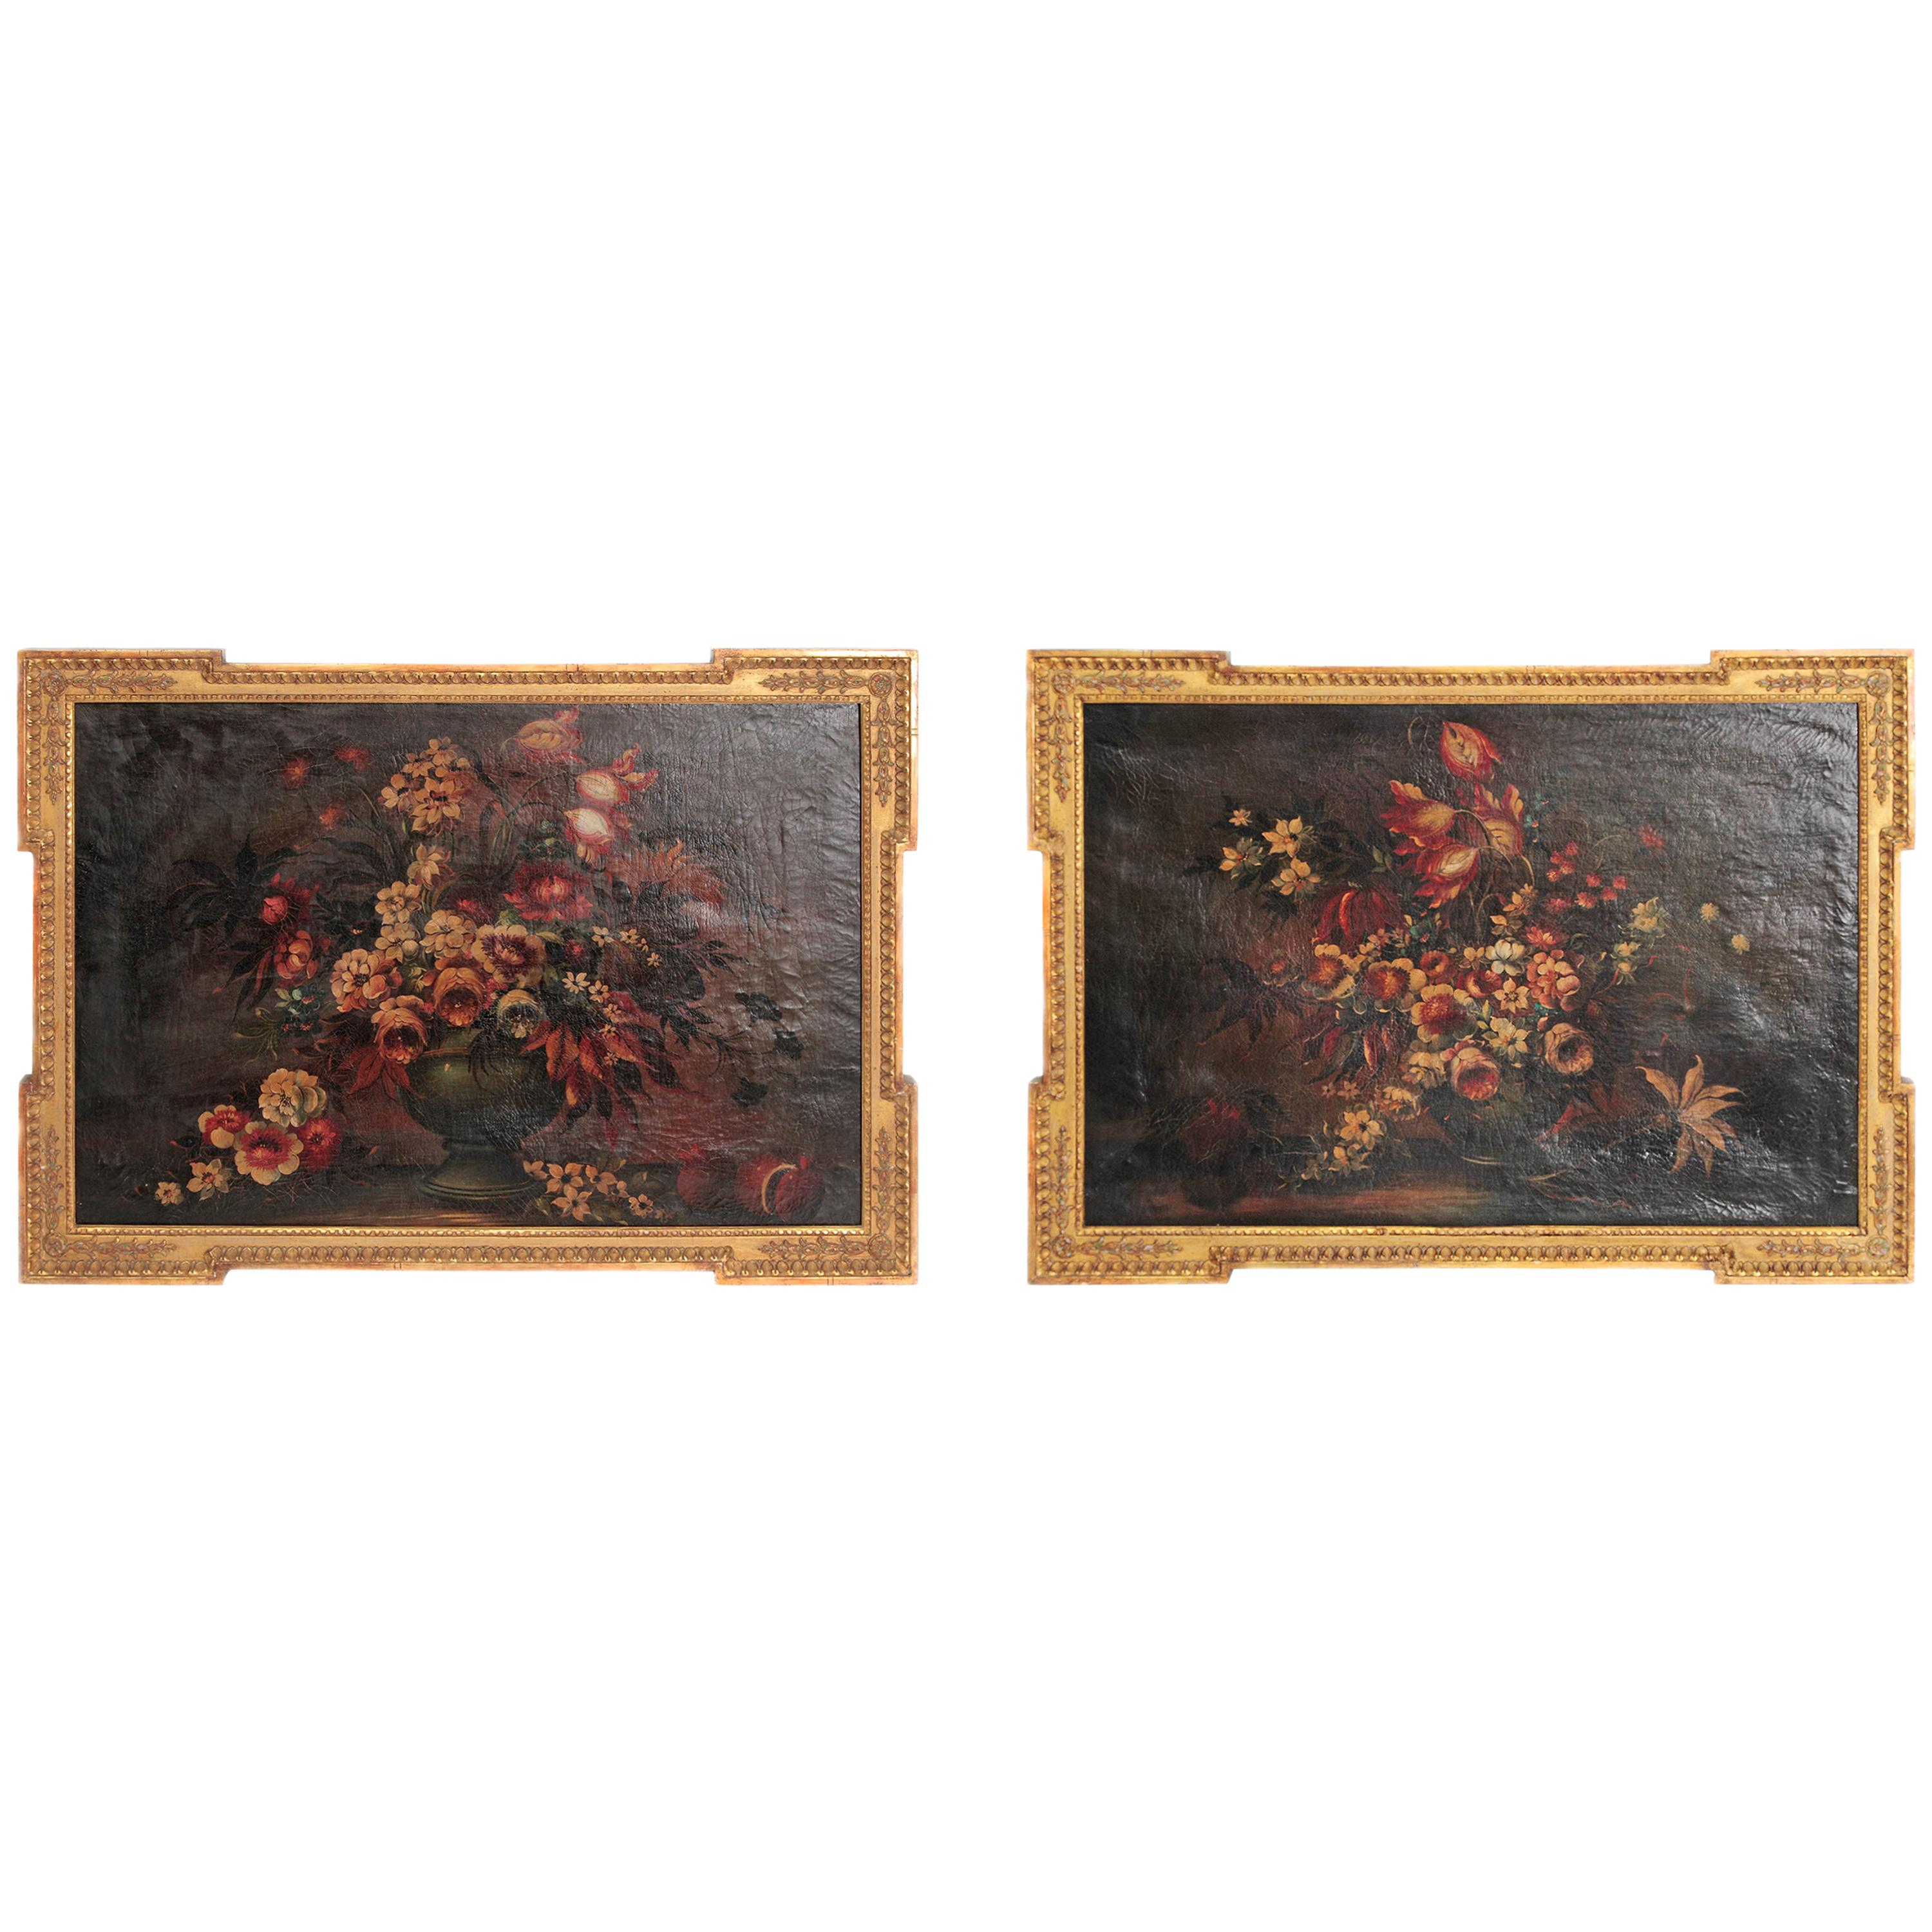 Pair of Framed Floral Still-Life Paintings / 19th Century Continental